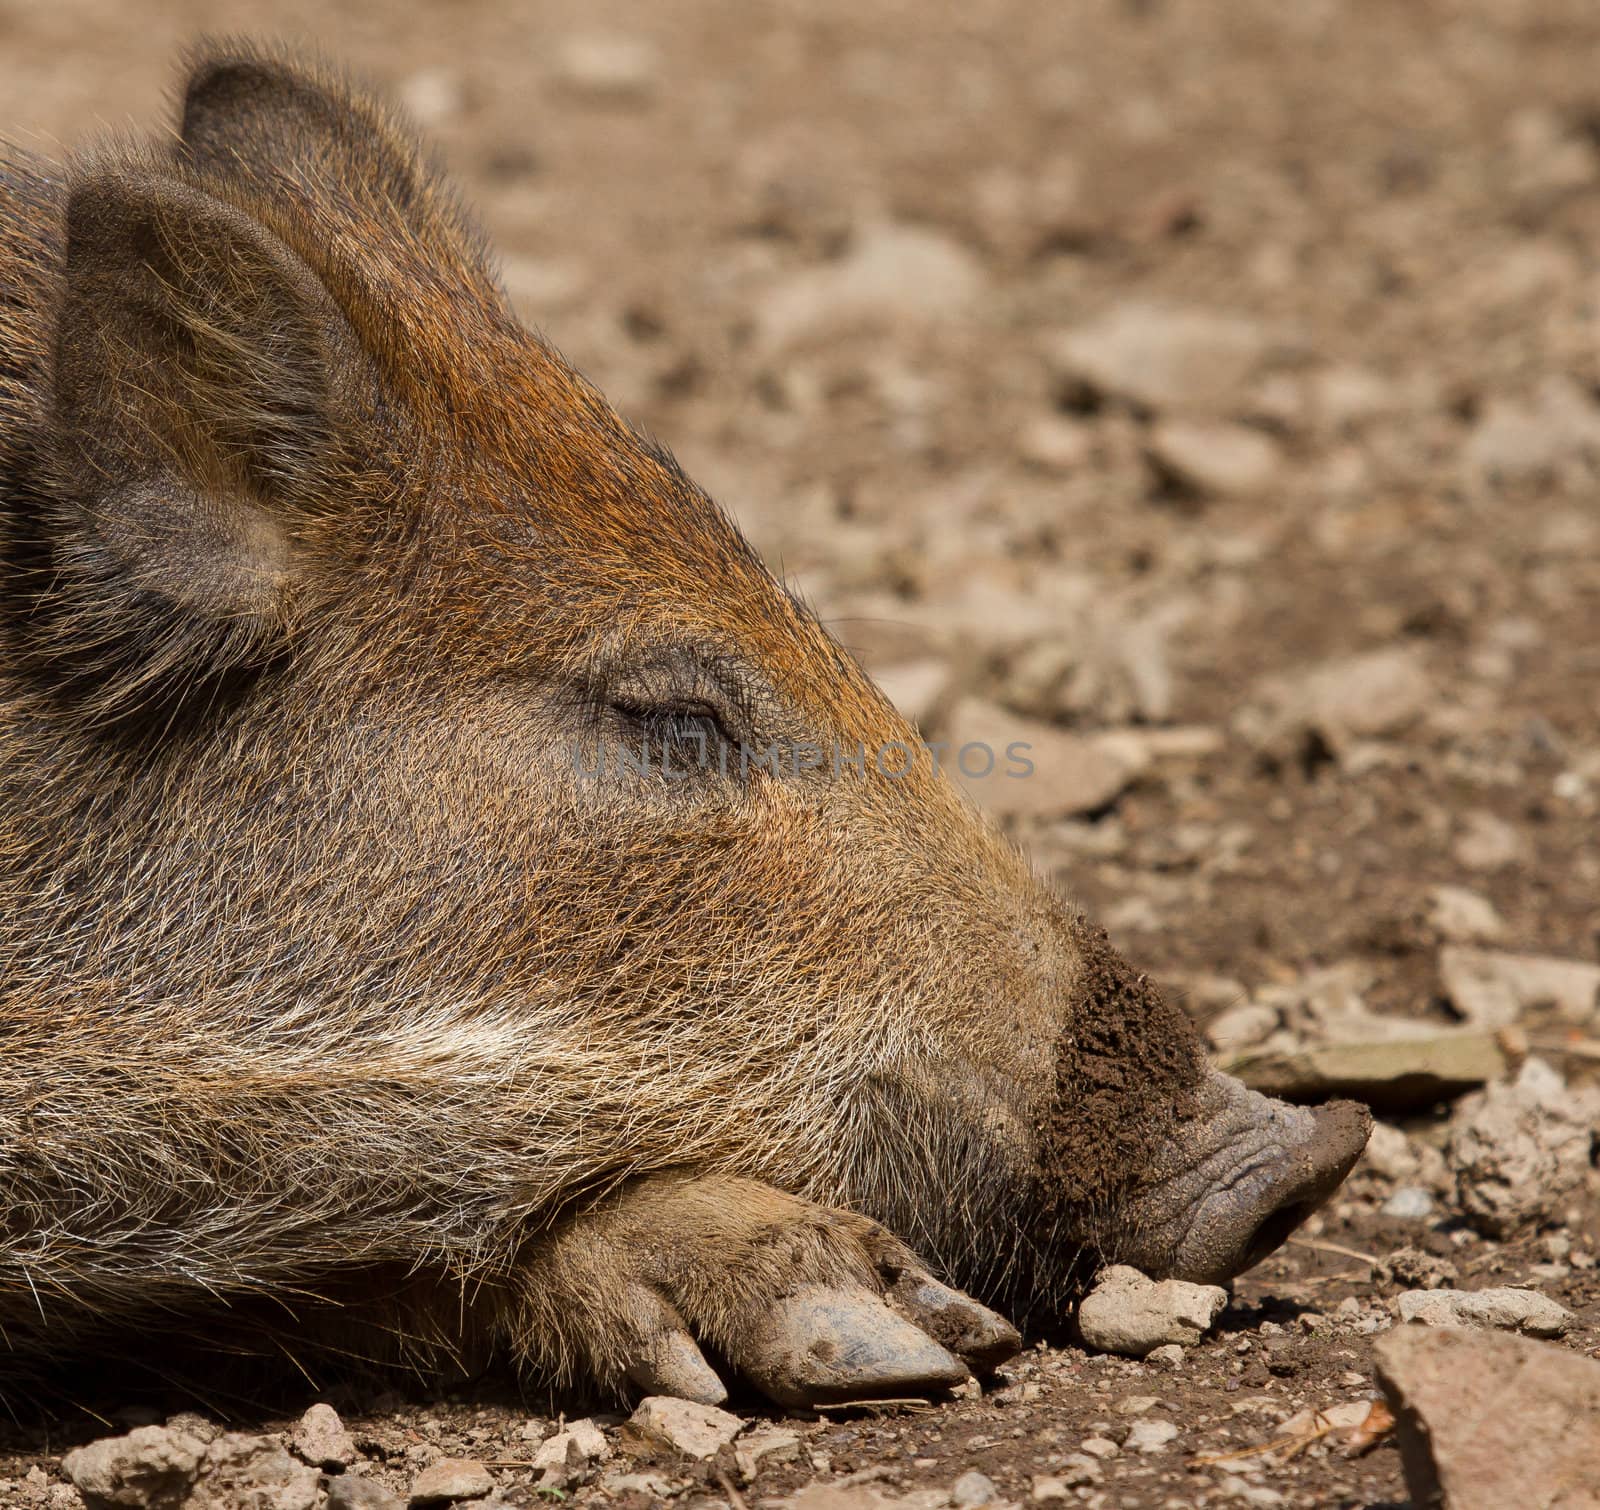 A wild boar is resting in the sand